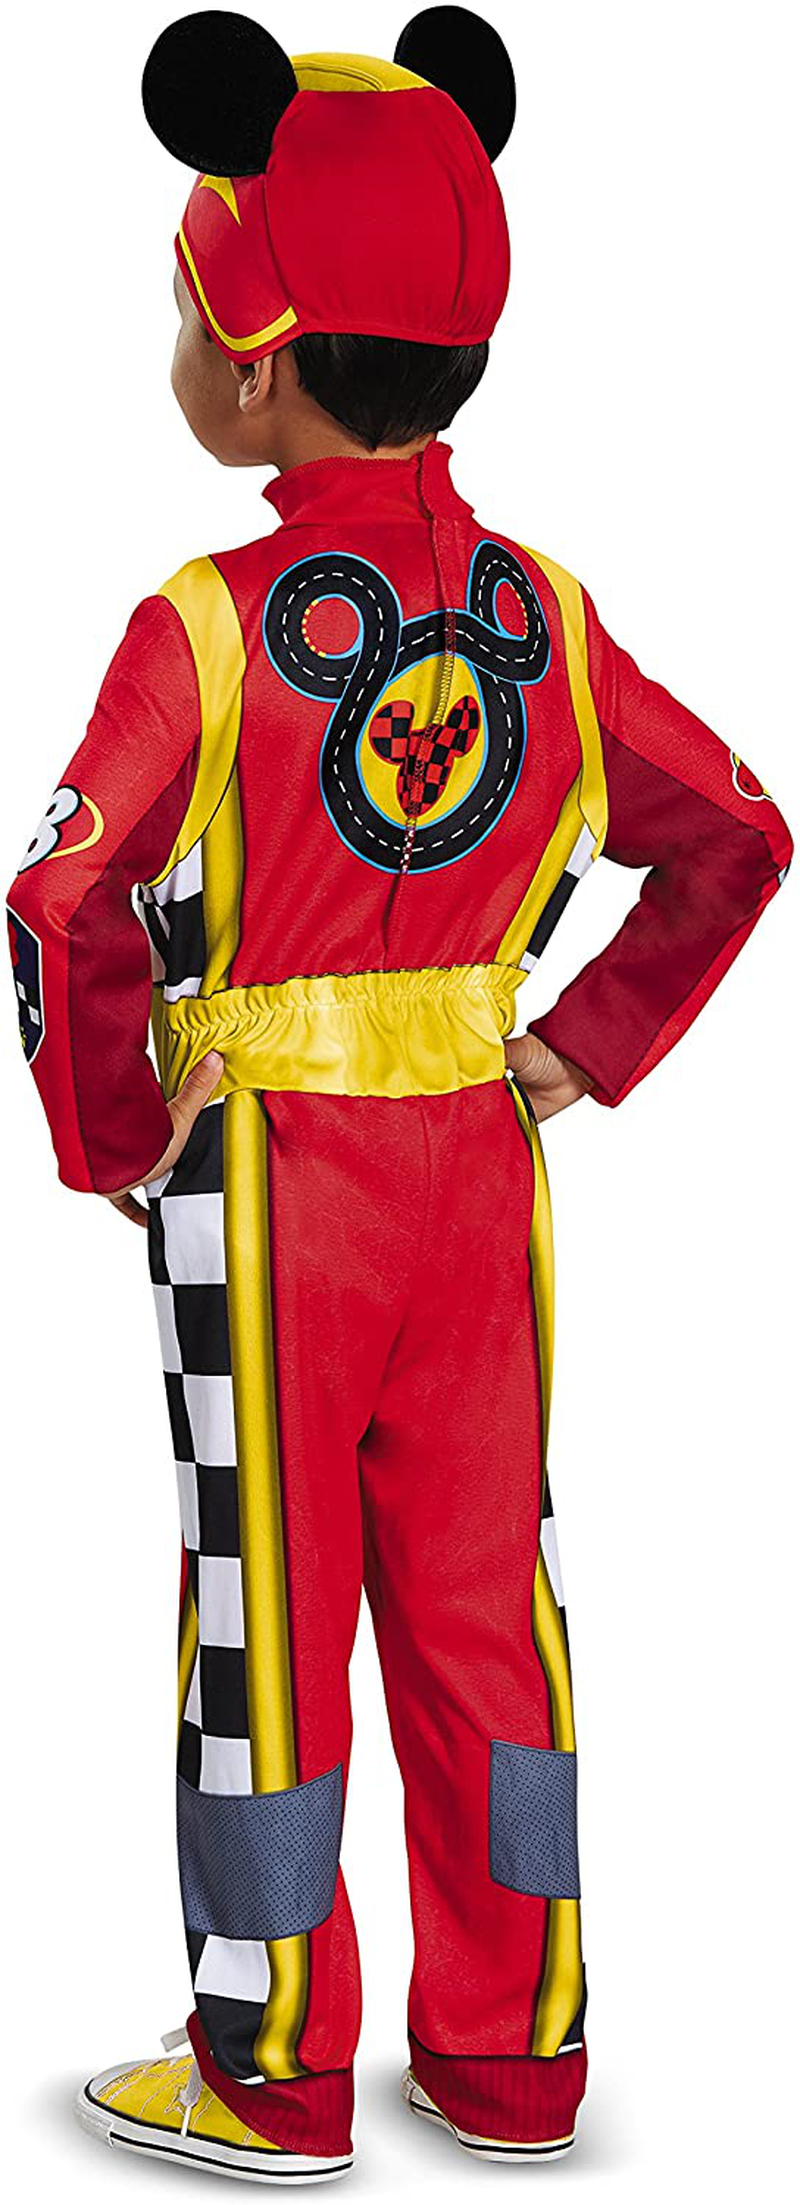 Disguise Disney Mickey Mouse Roadster Racer Toddler Boys' Costume M (3T-4T)